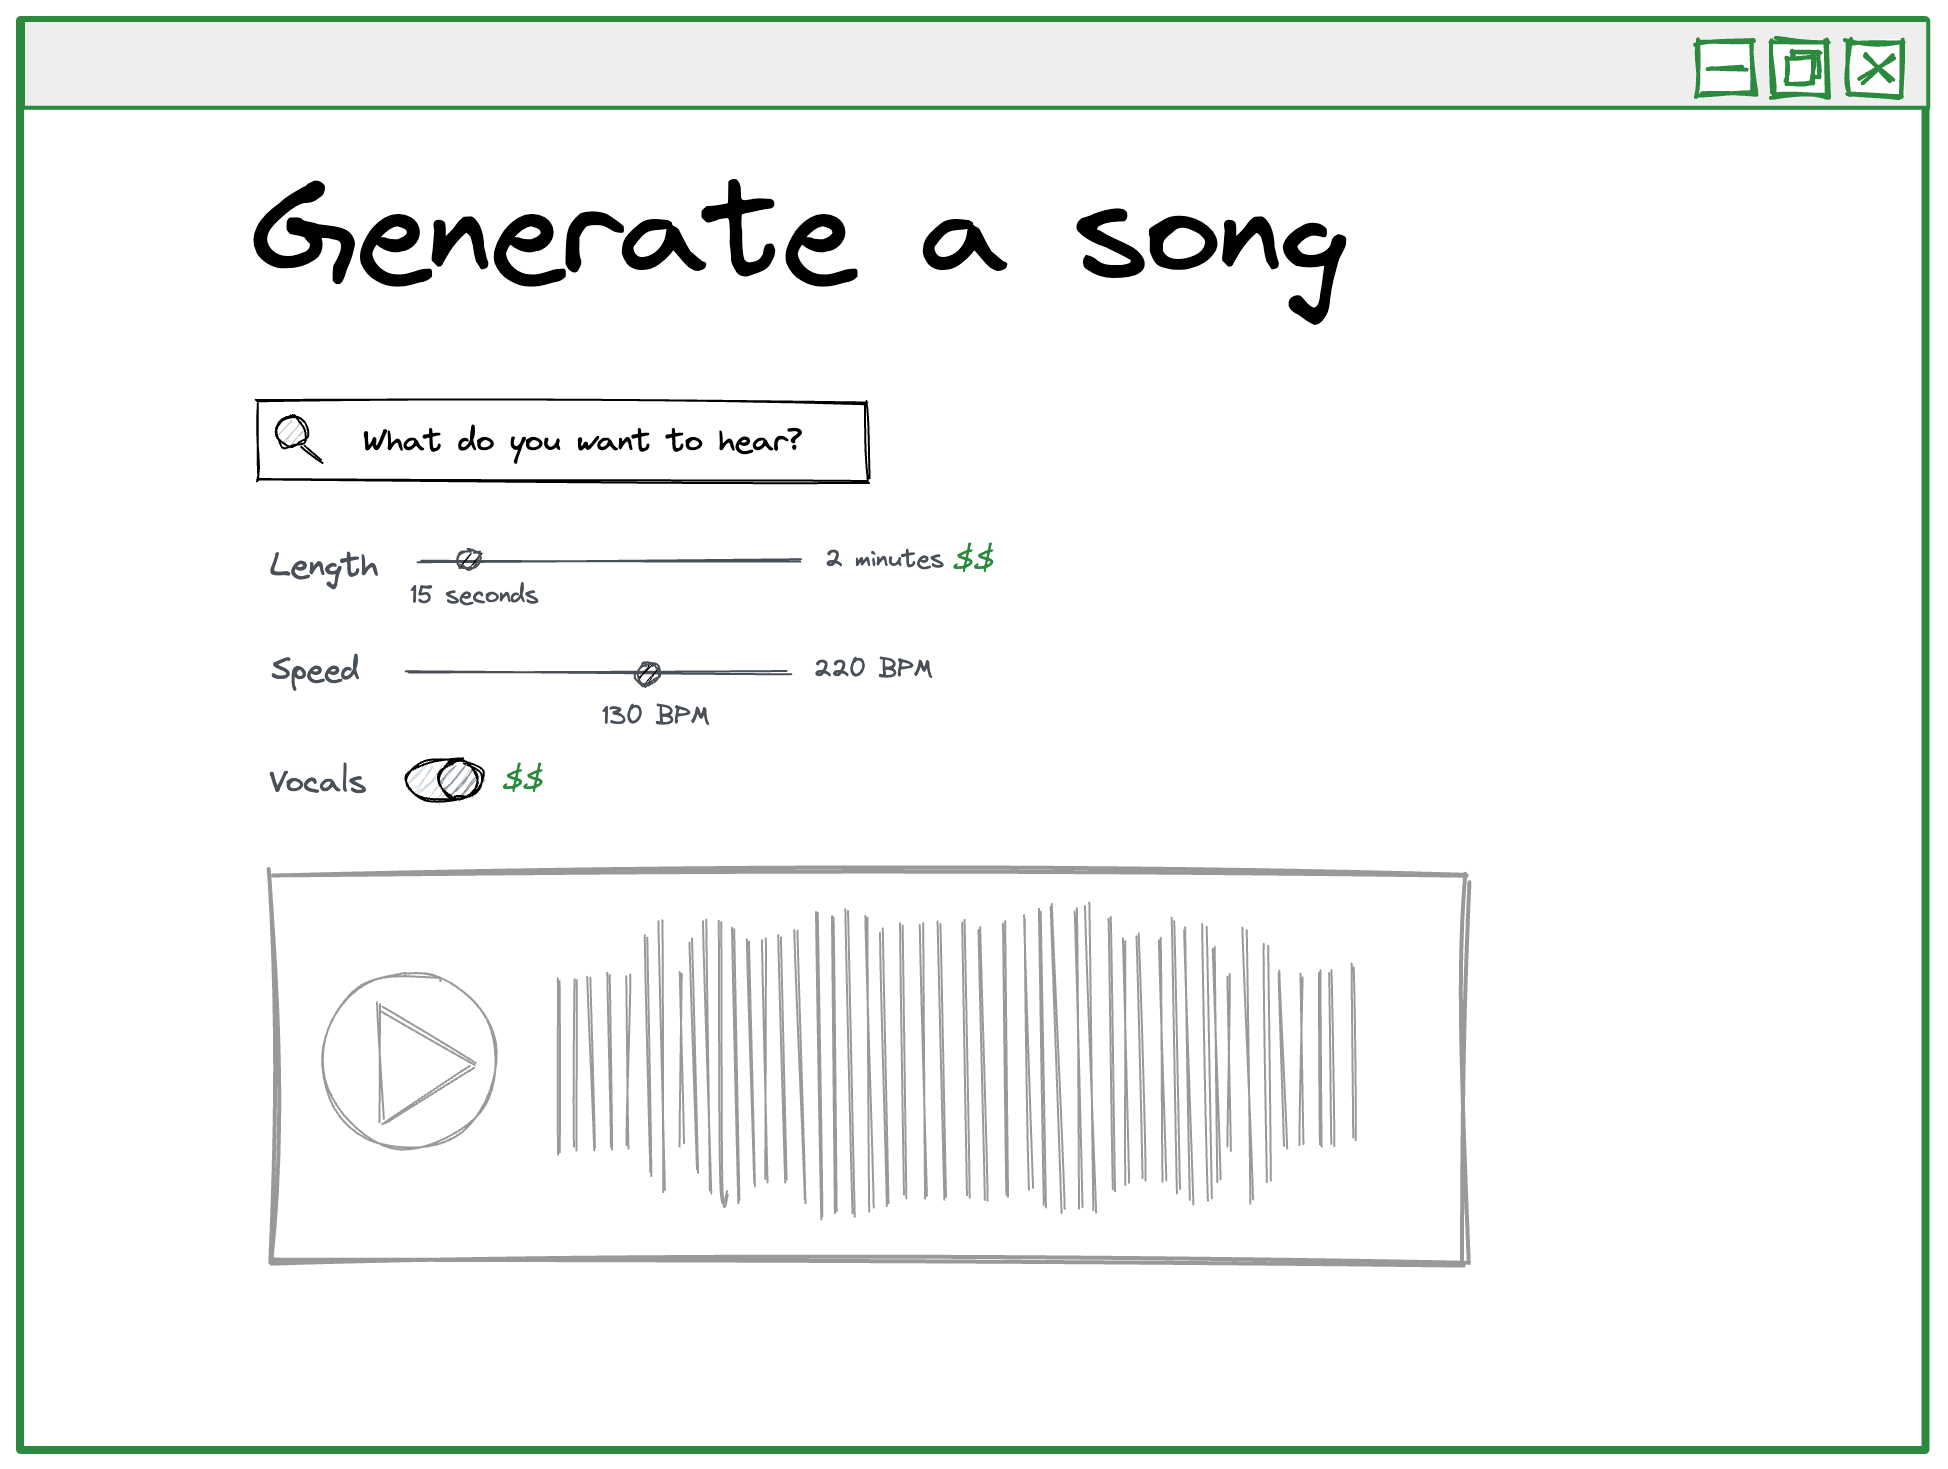 sketch mockup of a user interface titled Generate a song and a text input prompted with “What do you want to hear?” and additional sliders to specify the length, up to 2 minutes and set at 15 seconds, the speed up to 220 bpm and set to 130 bpm, and a toggle for vocals.